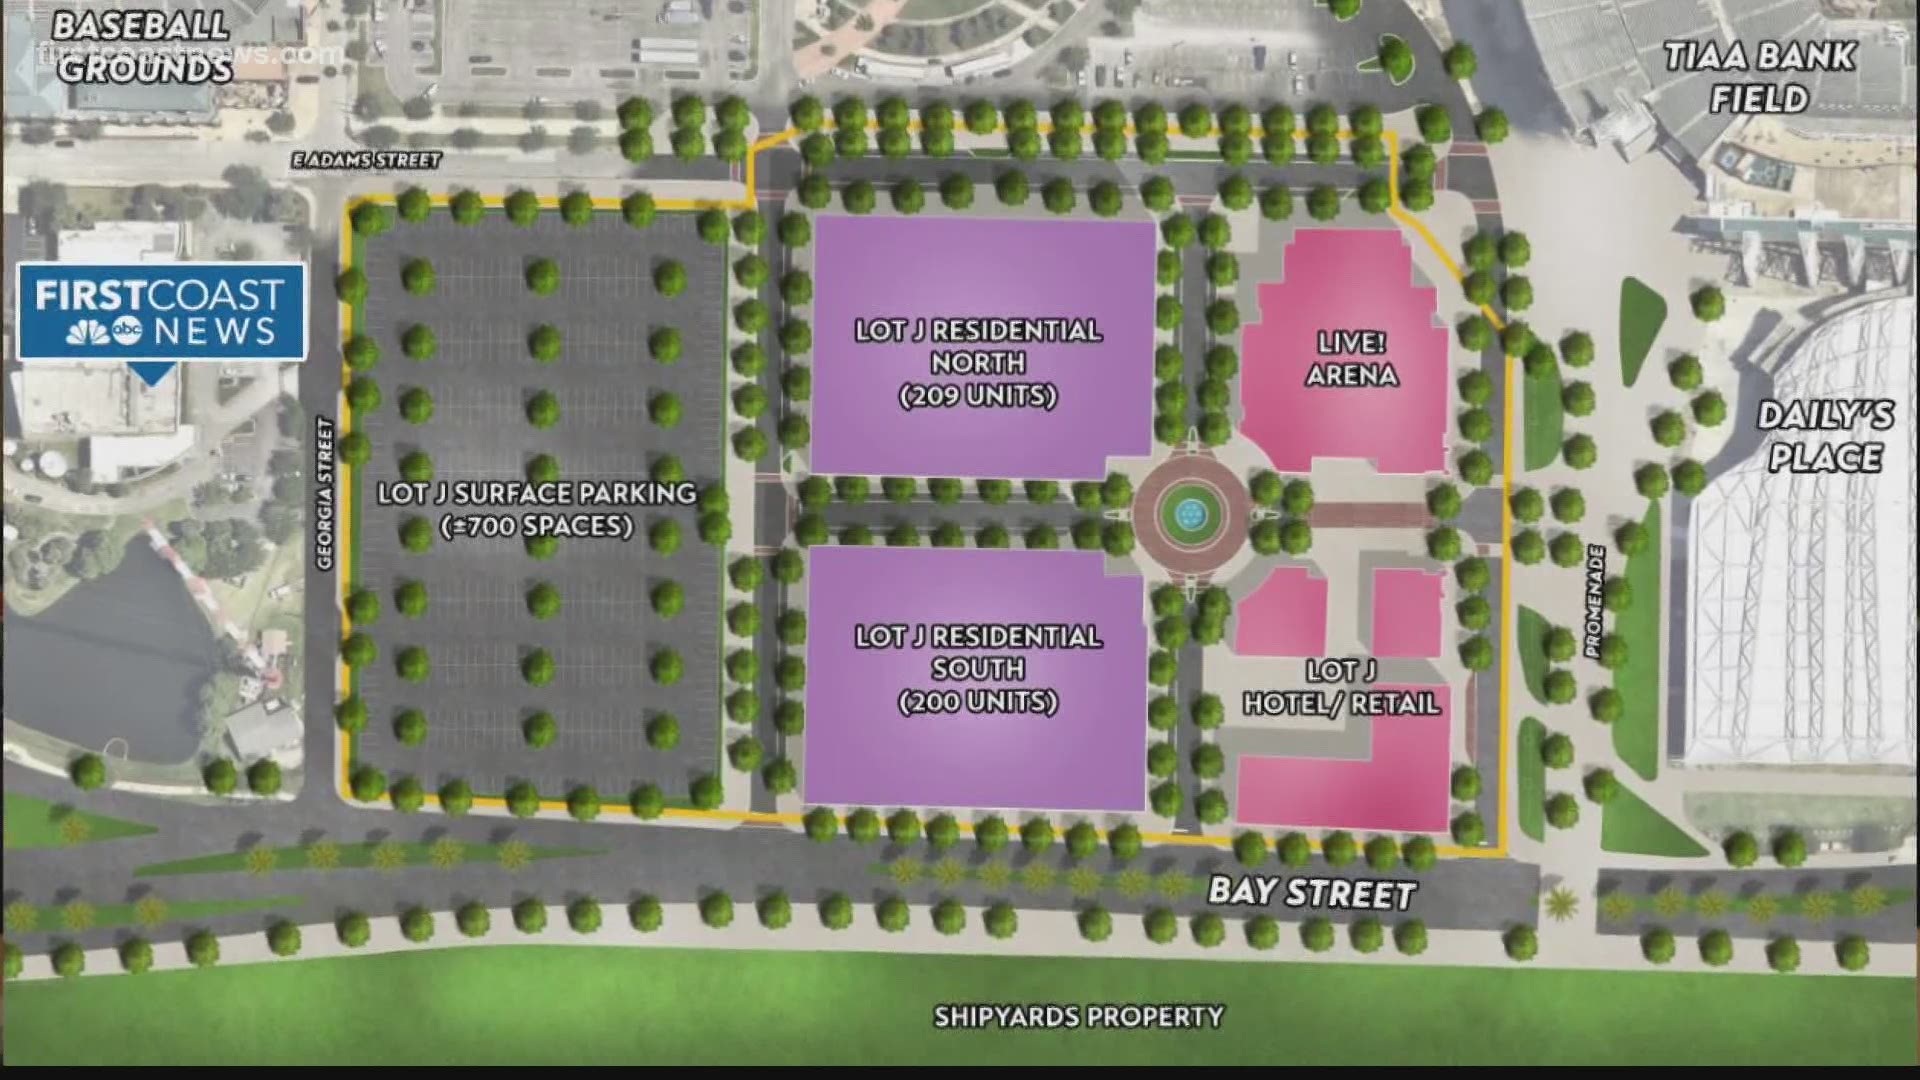 The city's share of funding for the $450 million Lot J project is expected to be discussed at length as council considers whether to approve Mayor Curry's proposal.